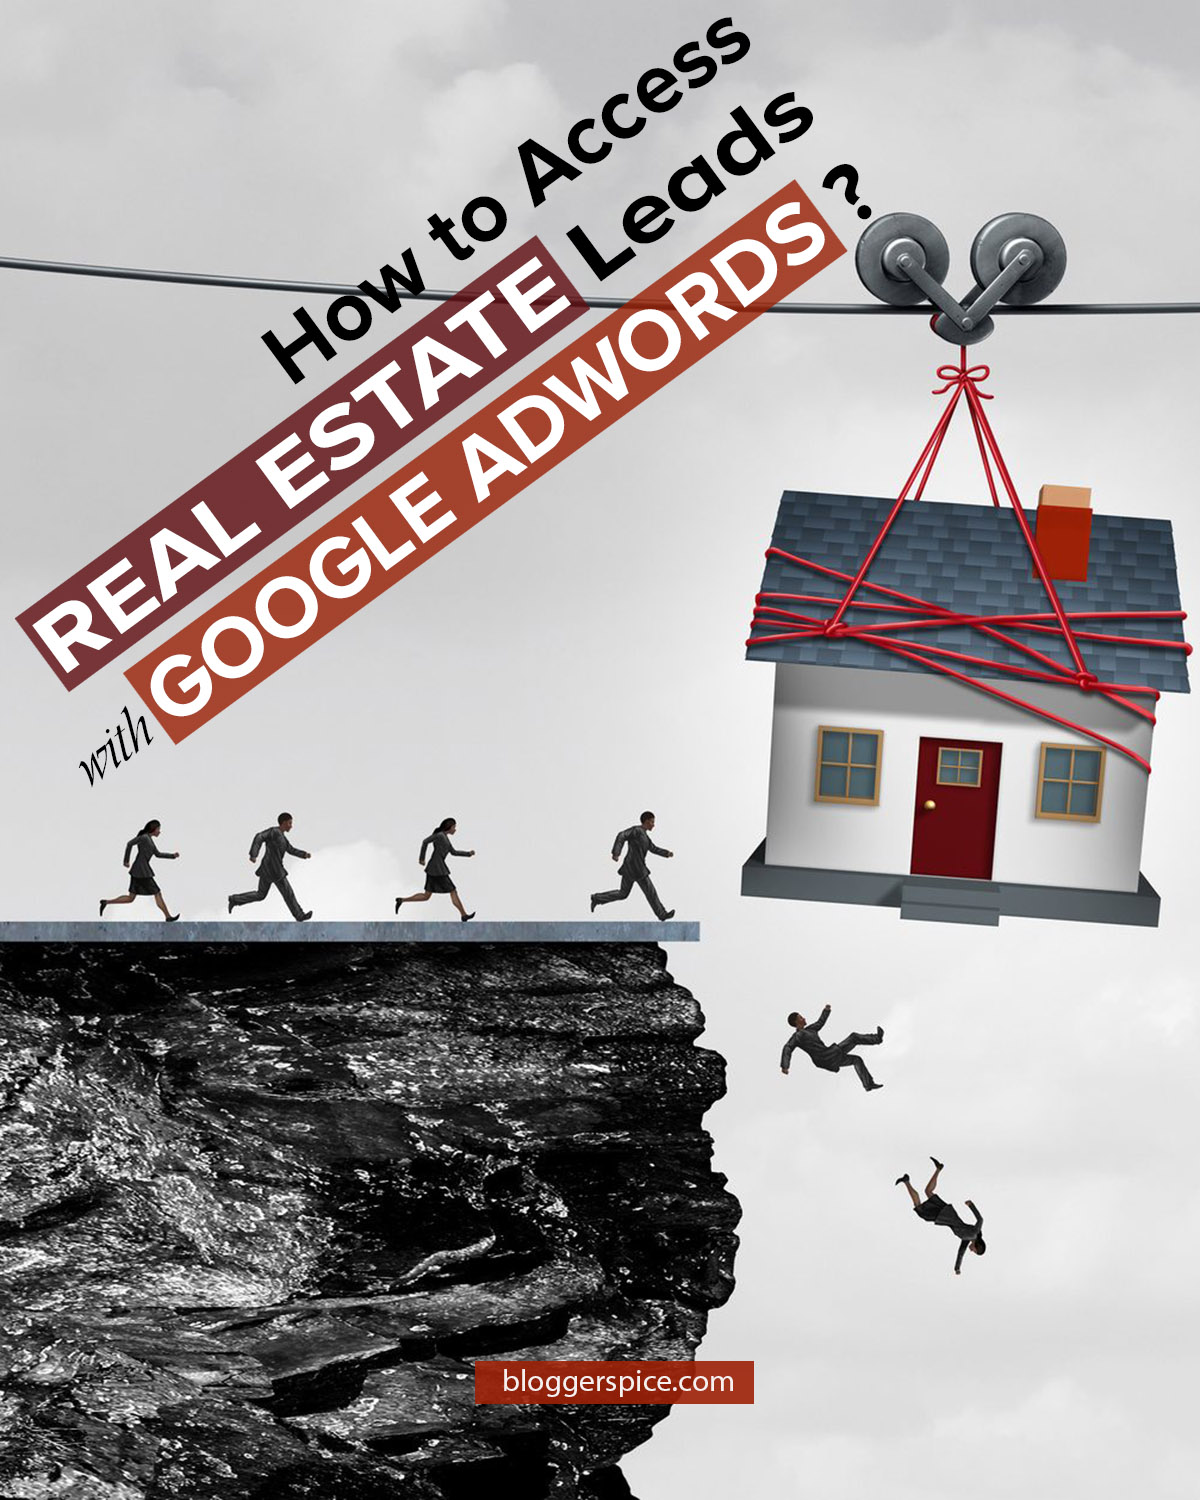 Real Estate Leads | PPC Real Estate Marketing | Google Adwords